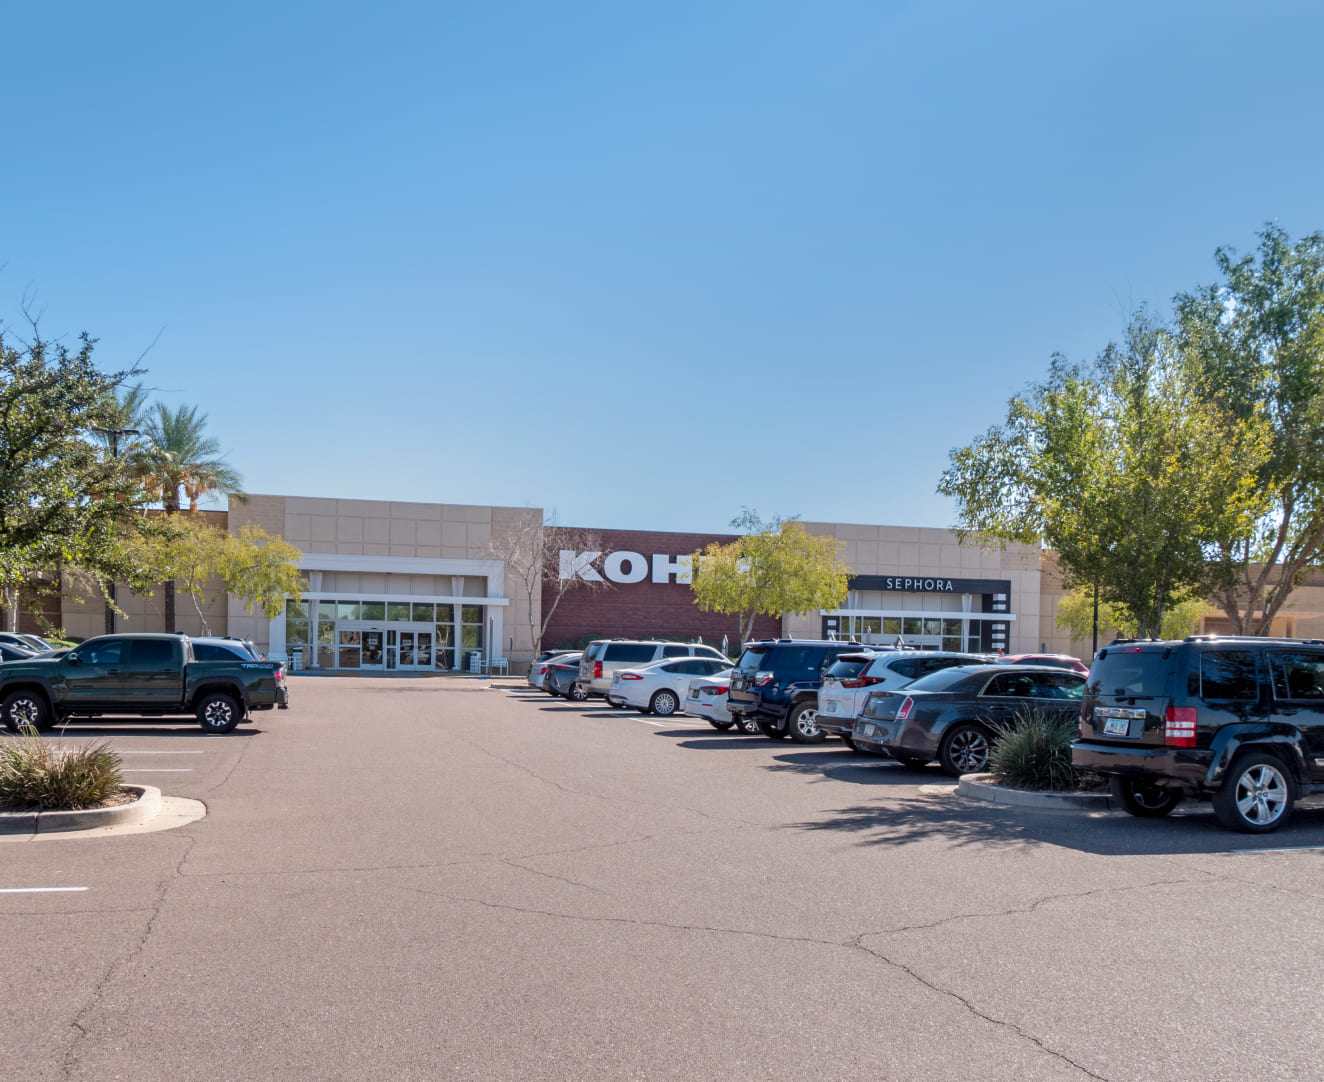 The entrance of Kohl's from the parking lot, located at 1161 N. Dysart Road in Avondale, AZ.